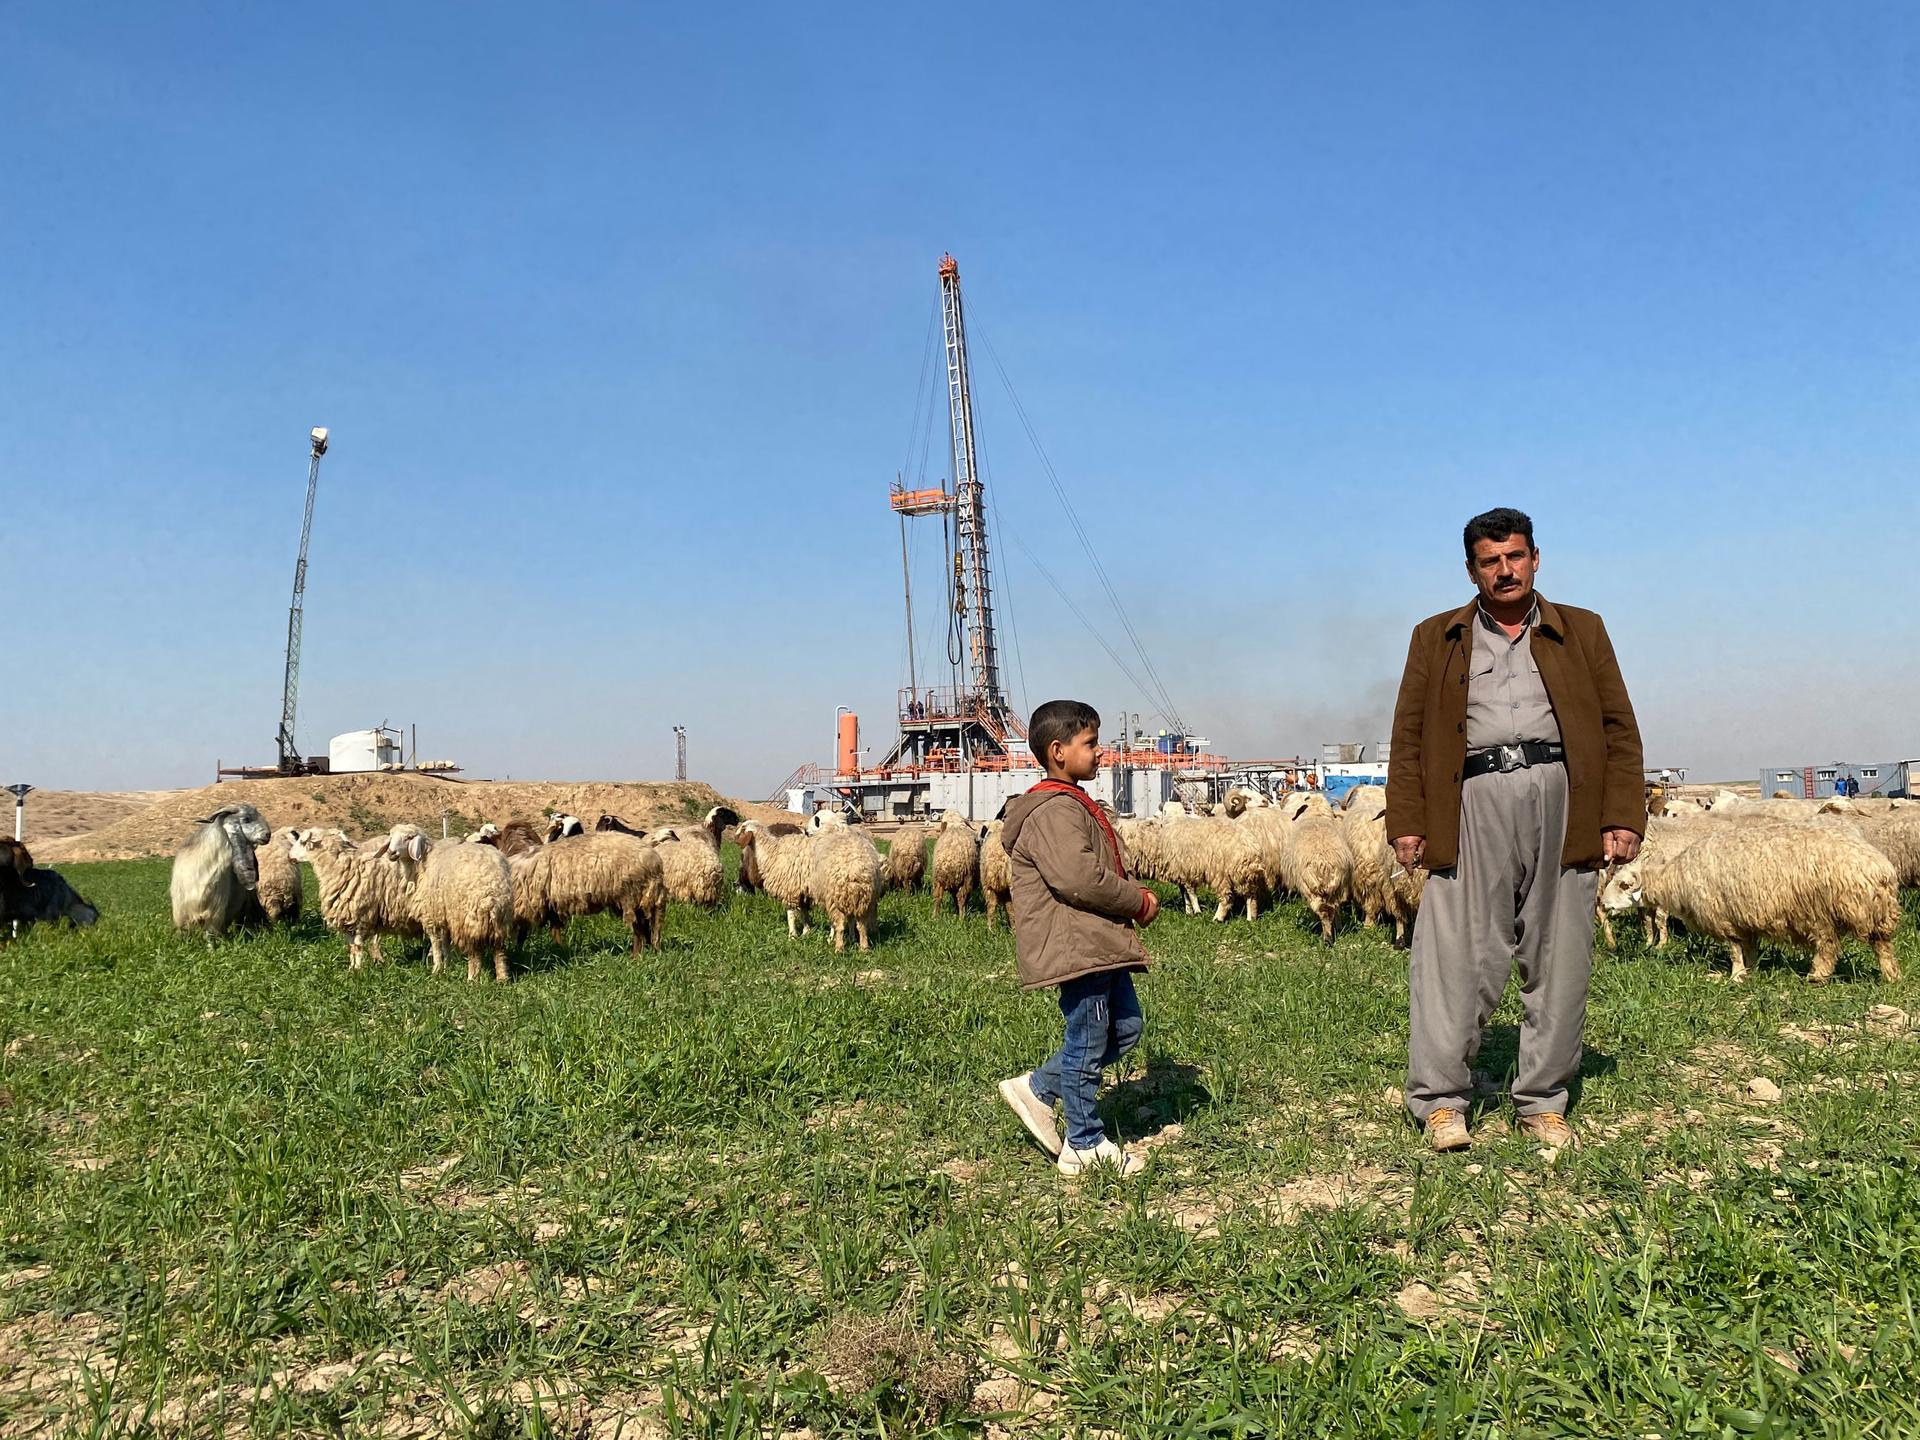 Hassan Mohammed Hassan, Lheiban village’s community leader, poses for a picture among sheep at his farm, with his 5-year-old son Mohammed, nicknamed Kako. The property borders a small oil field where Hassan works in security at night. 